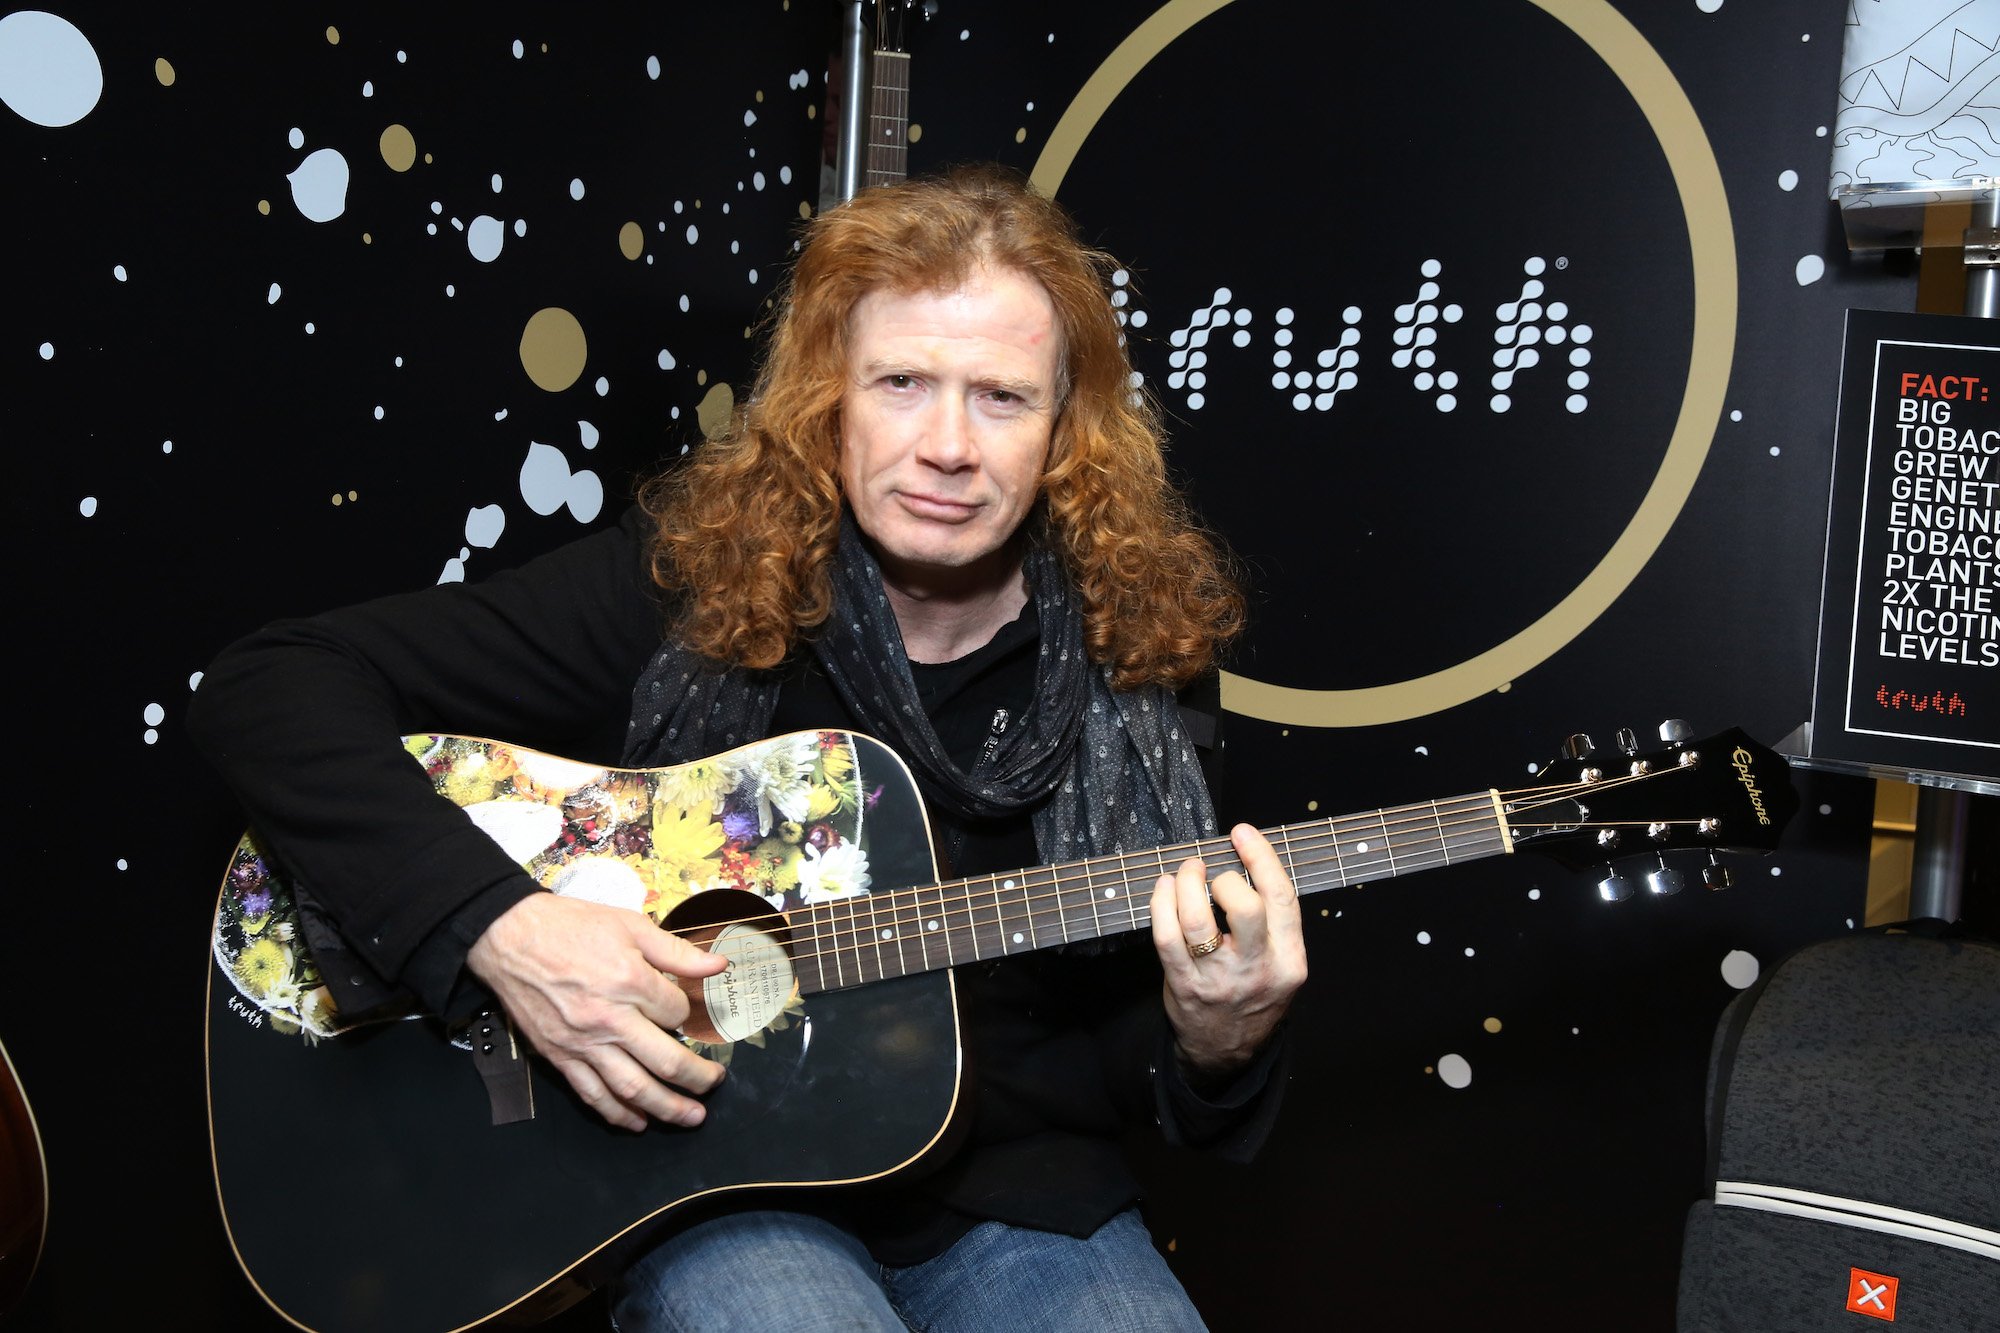 Dave Mustaine slightly smiling, holding a guitar